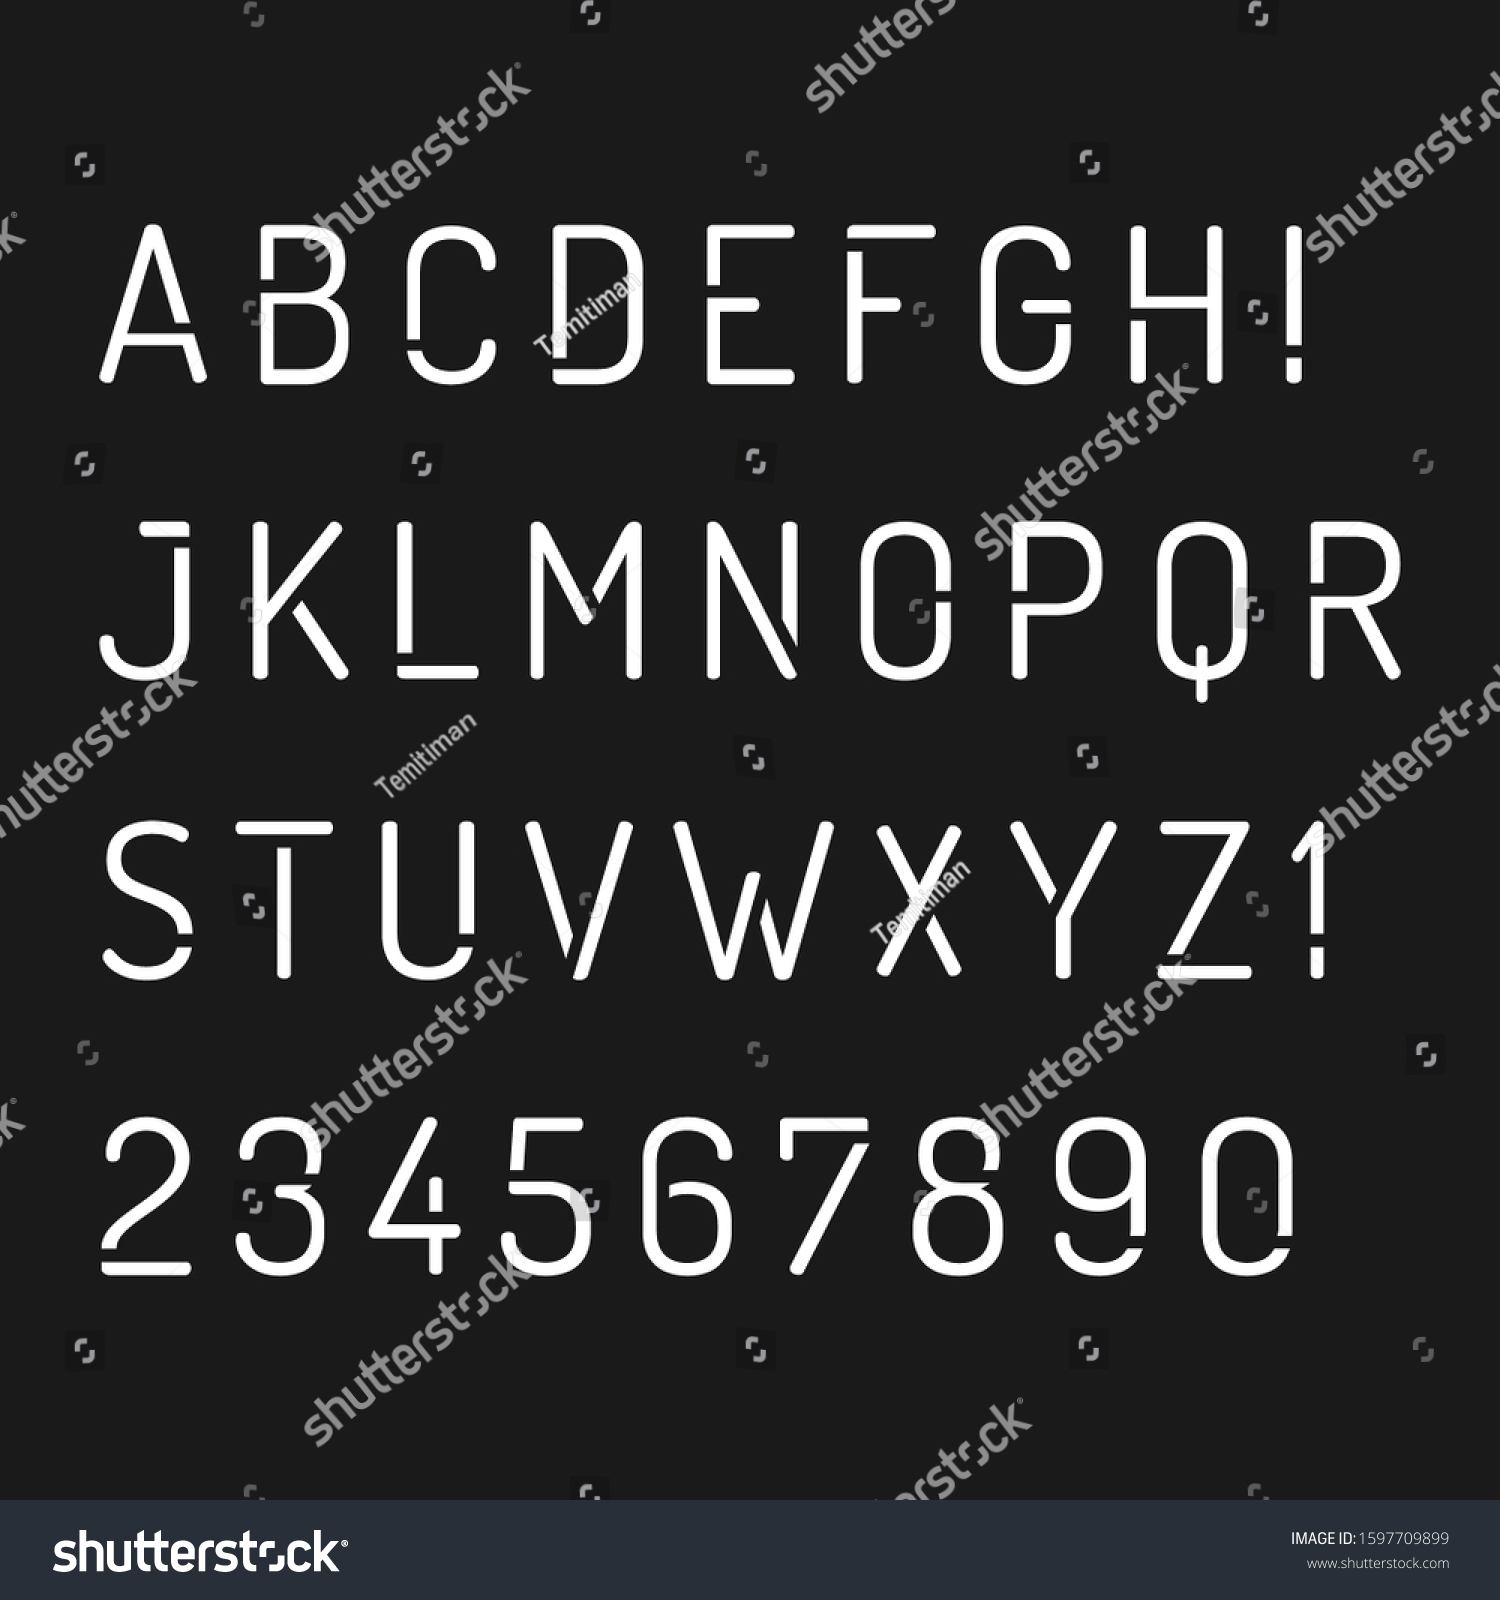 Download Abstract Digital Modern Alphabet Fonts Typography Stock Vector Royalty Free 1597709899